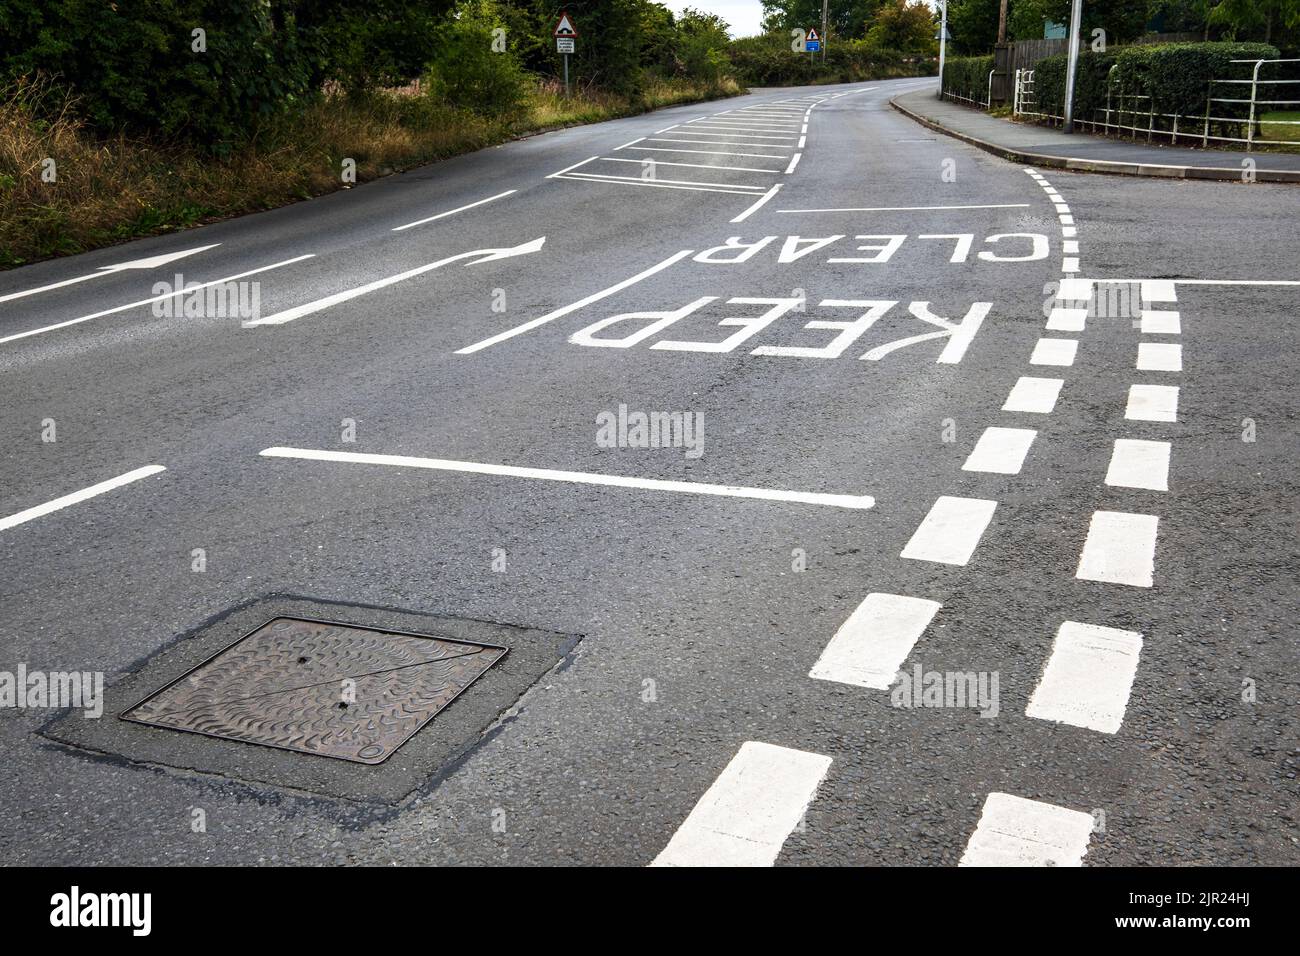 Lots of white traffic lines painted on tarmac UK Stock Photo